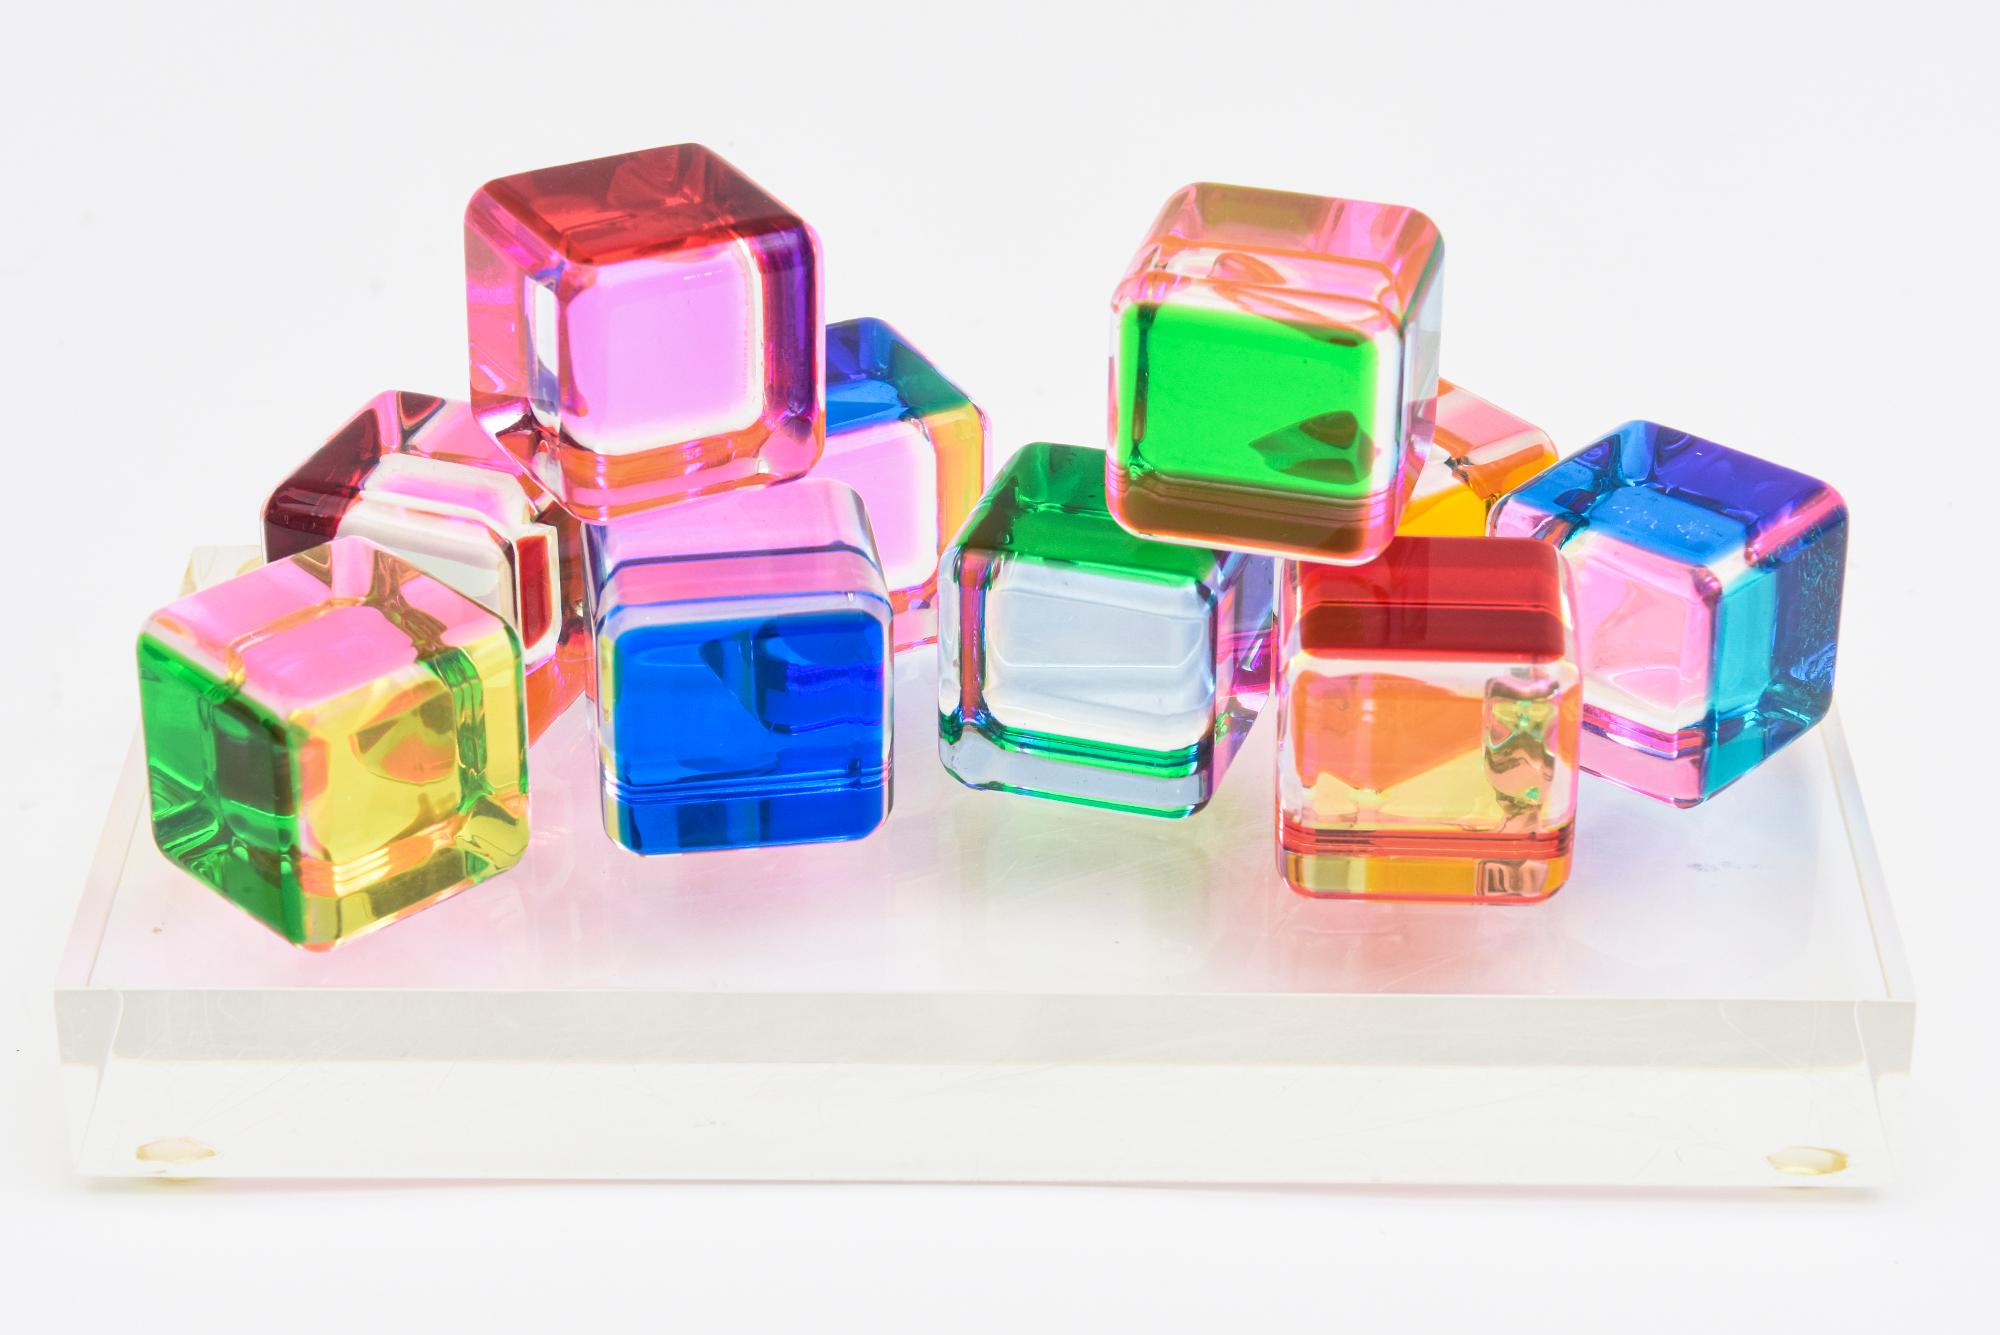 Vasa Mihich Laminated Lucite Cube Sculptures Signed Set of 10 on Lucite Base 2